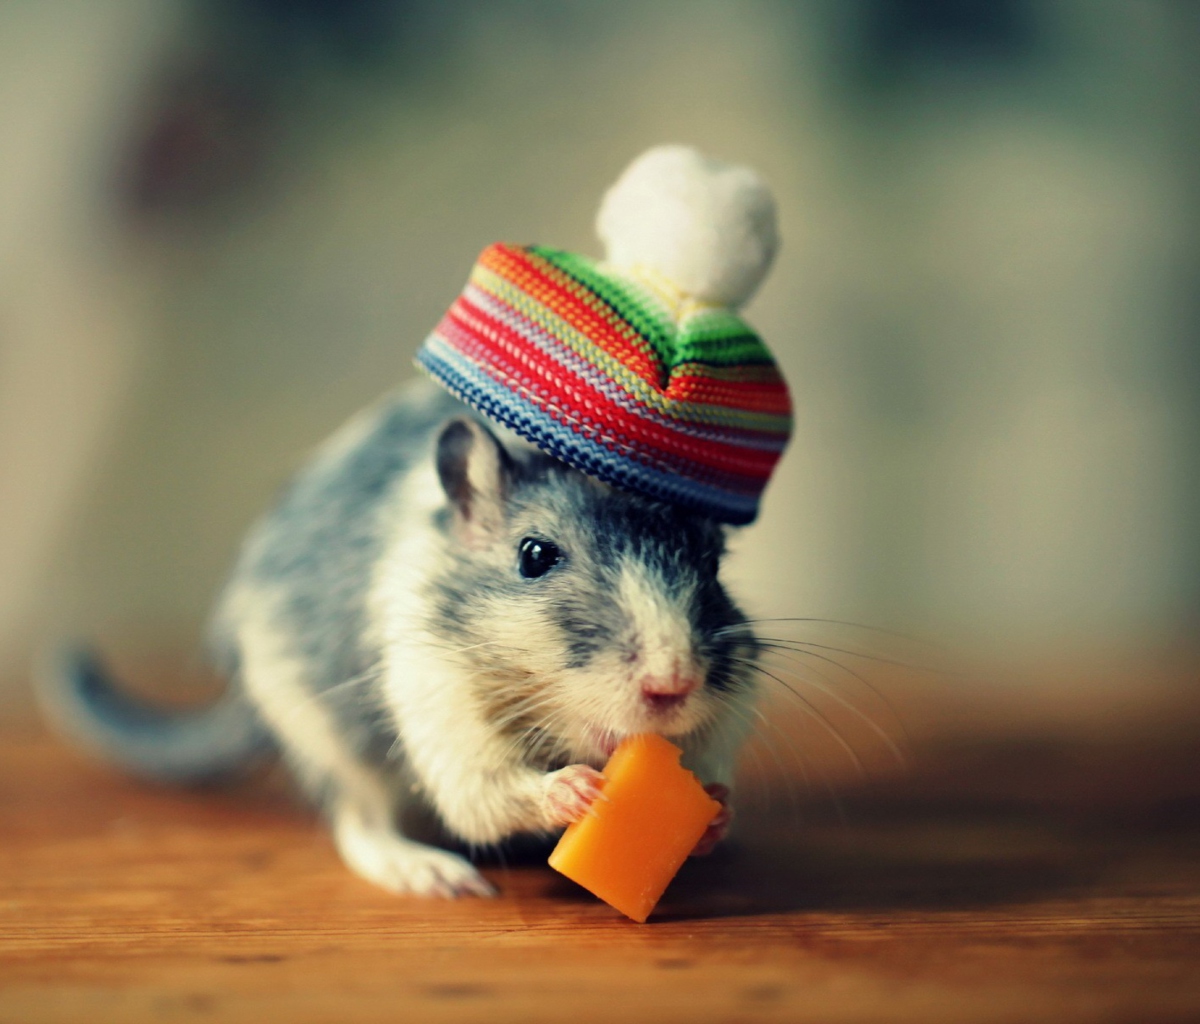 Das Mouse In Funny Little Hat Eating Cheese Wallpaper 1200x1024